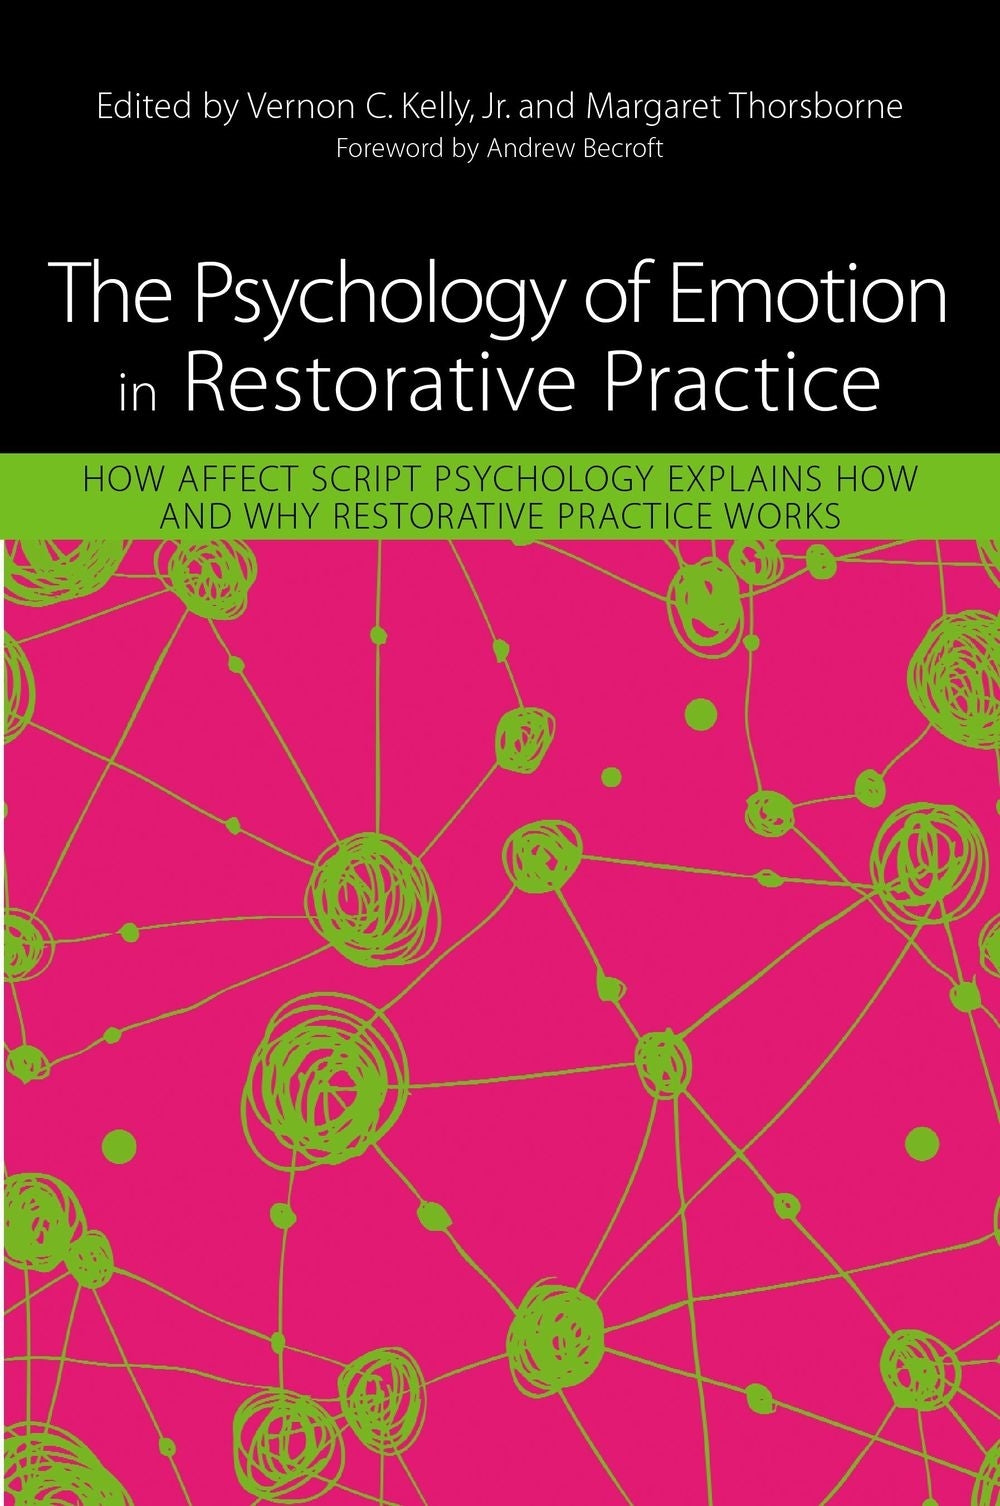 The Psychology of Emotion in Restorative Practice by Vernon Kelly, Margaret Thorsborne, No Author Listed